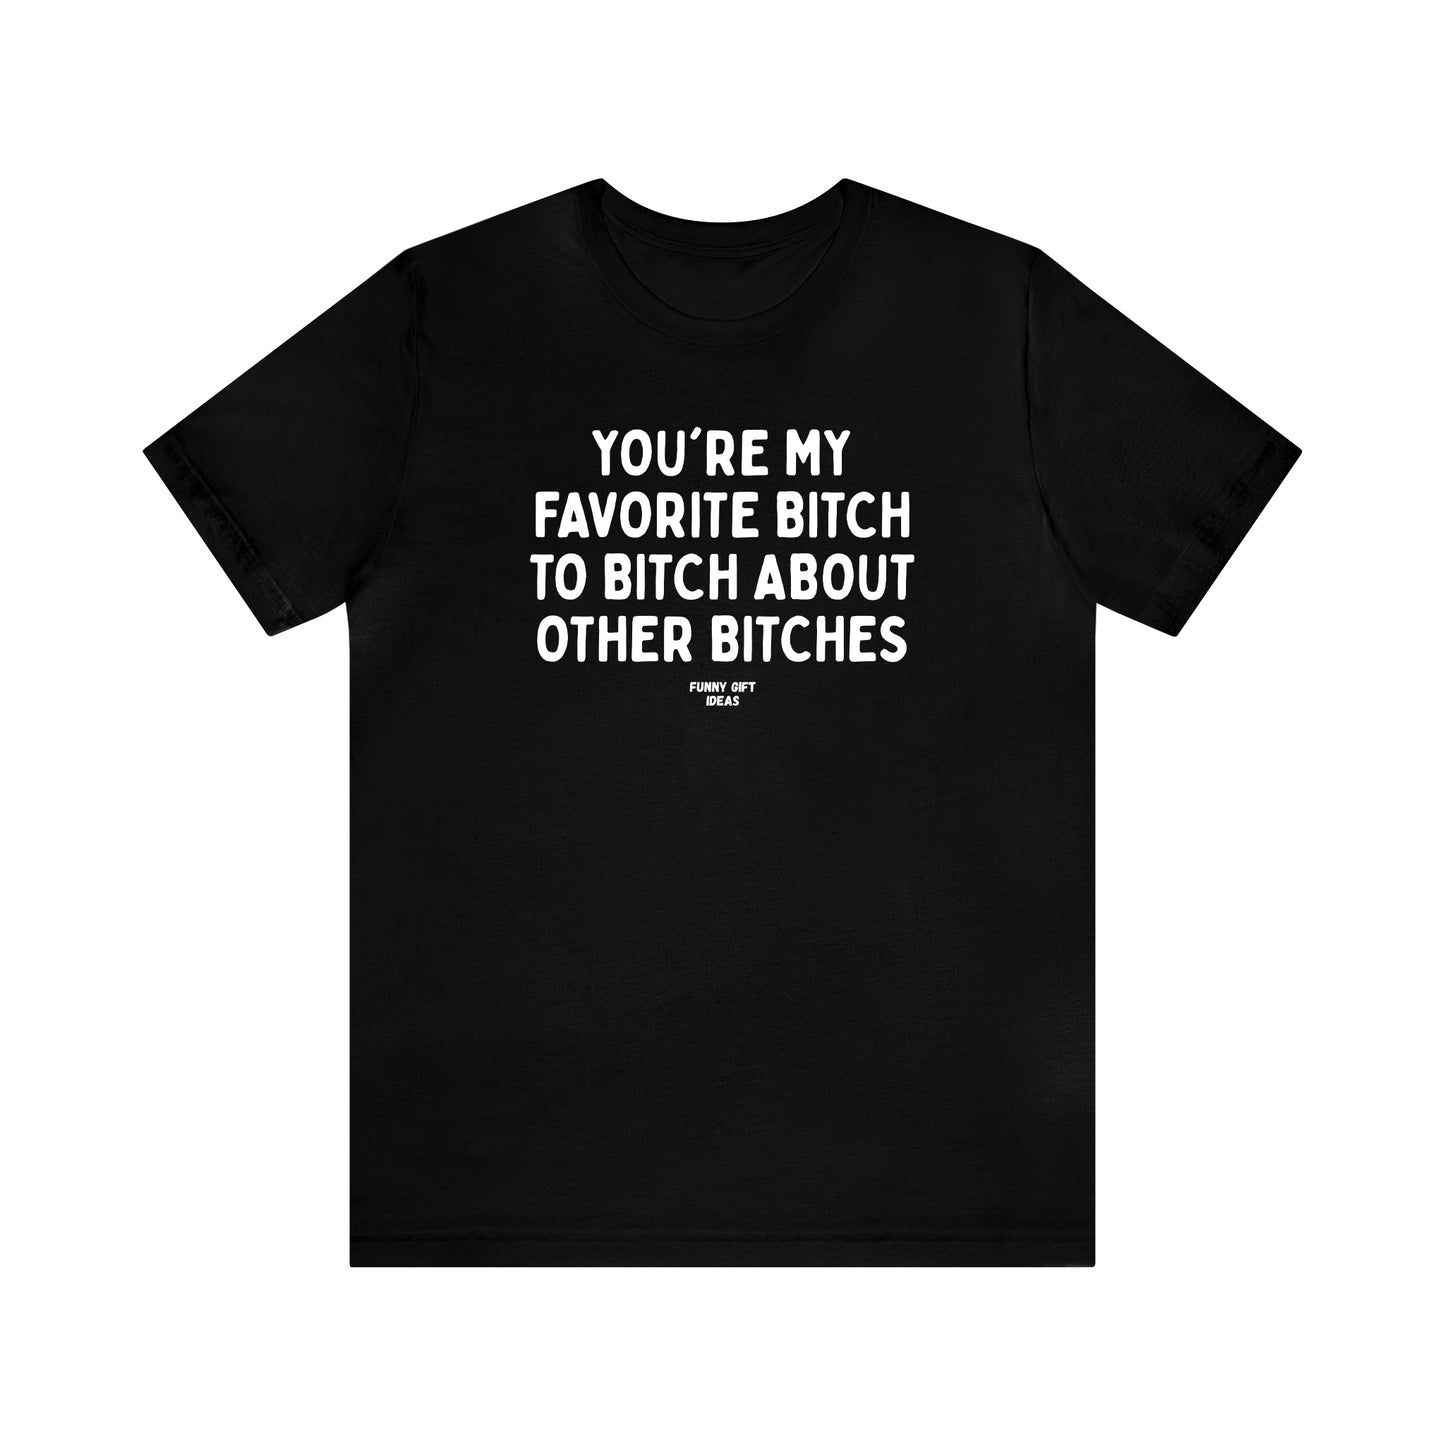 Funny Shirts for Women - You're My Favorite Bitch to Bitch About Other Bitches - Women's T Shirts